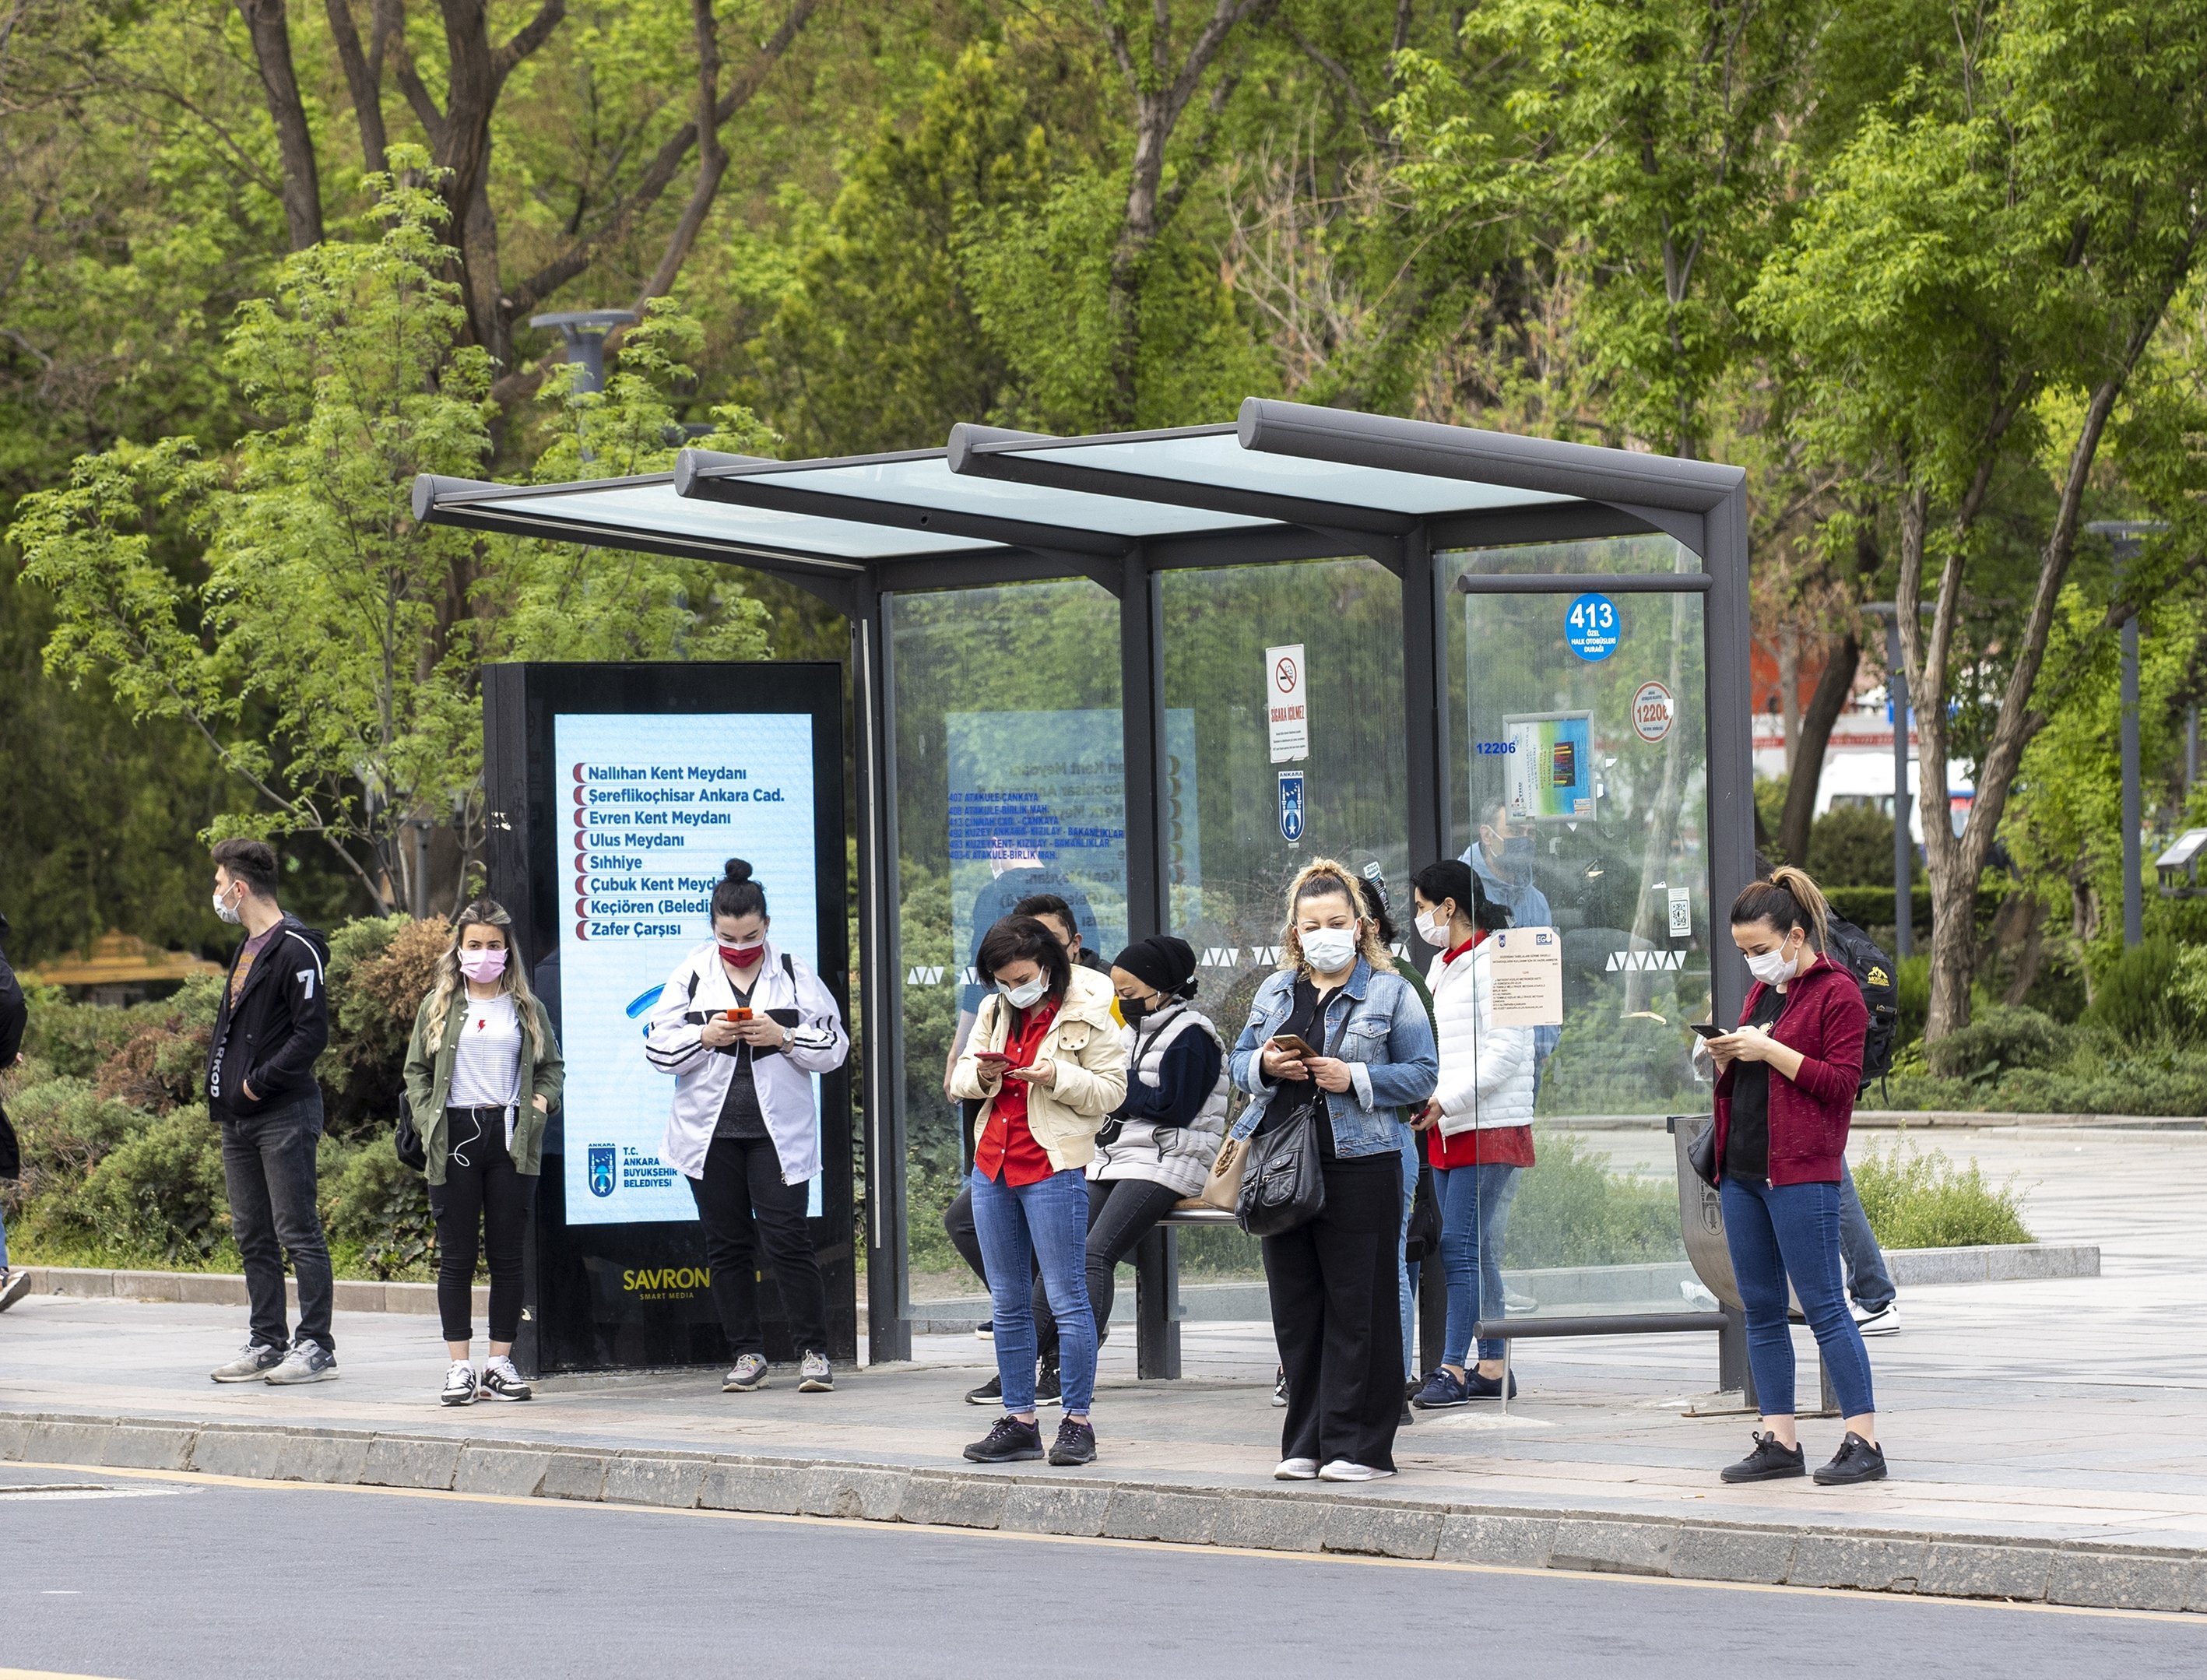 People wait at a bus stop on the first day of the three-week COVID-19 lockdown, Ankara, Turkey, April 30, 2021. (AA Photo)